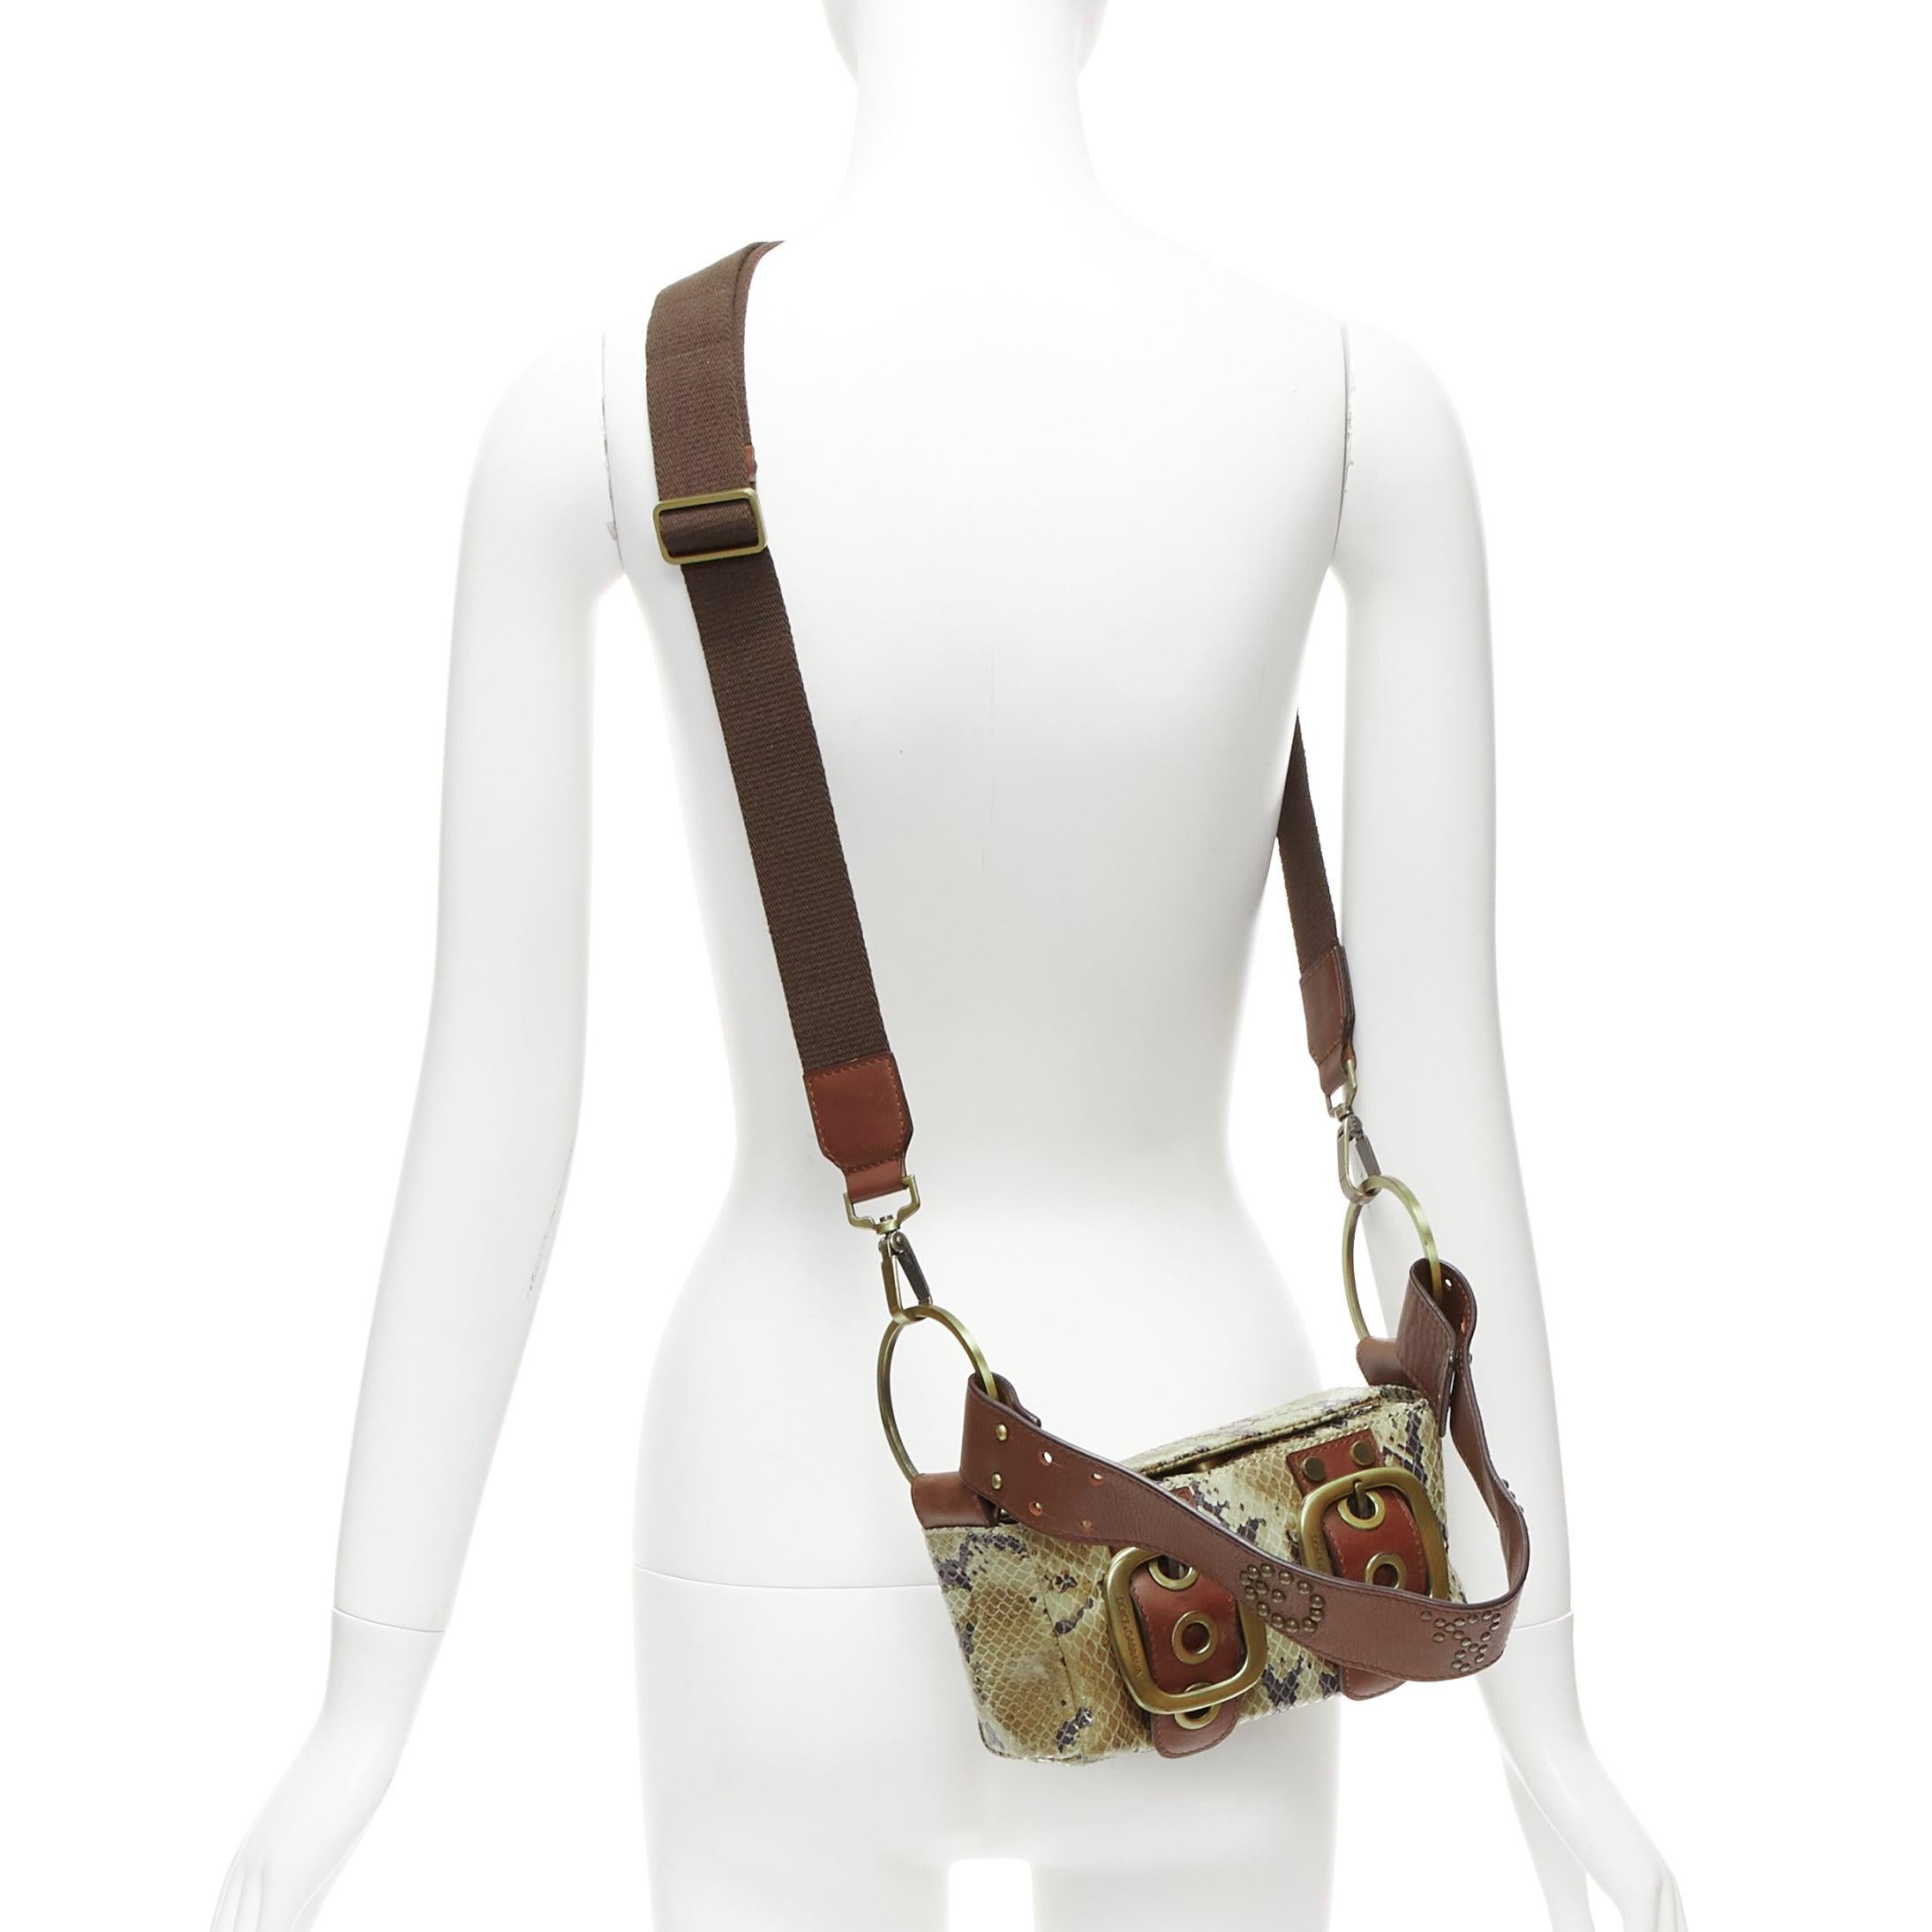 DOLCE GABBANA Vintage Y2K beige textured leather dual buckle boxy shoulder bag
Reference: TGAS/D00972
Brand: Dolce Gabbana
Designer: Domenico Dolce and Stefano Gabbana
Material: Leather, Metal
Color: Brown, Khaki
Pattern: Animal Print
Closure: Snap